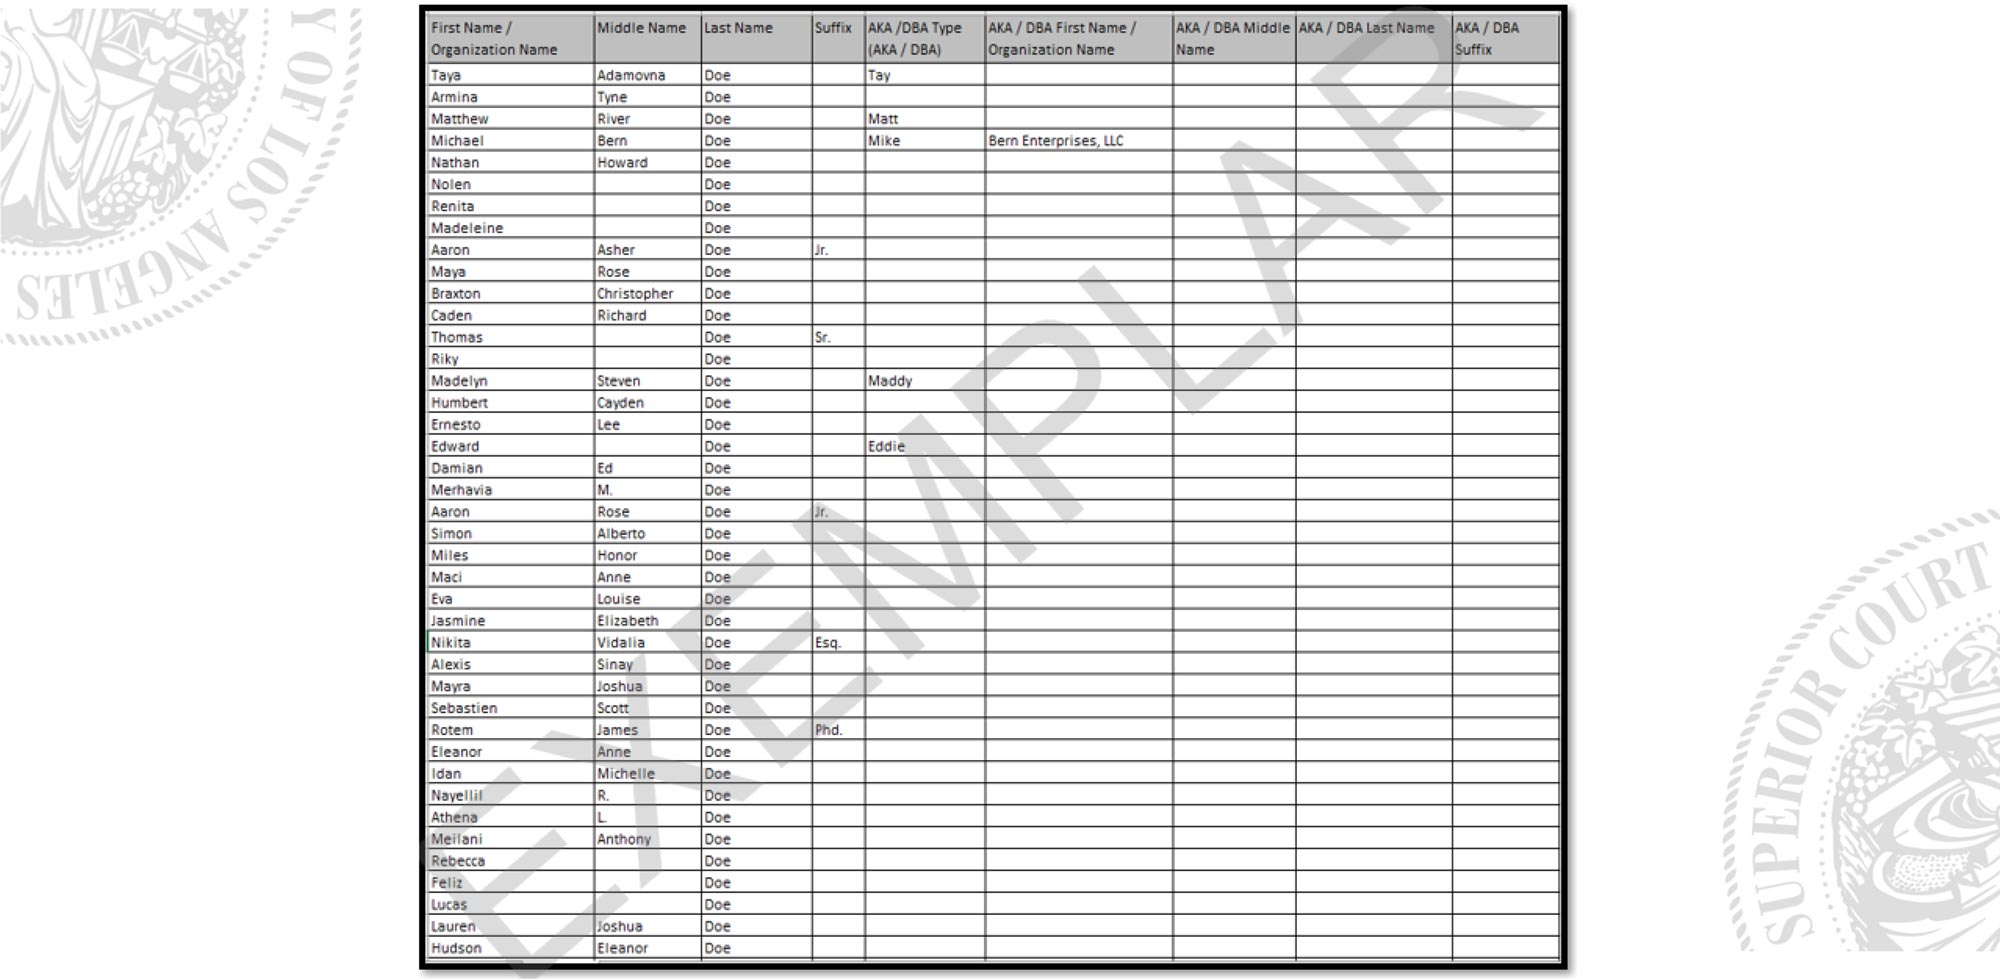 An Example of a Bulk Party List Excel Spreadsheet